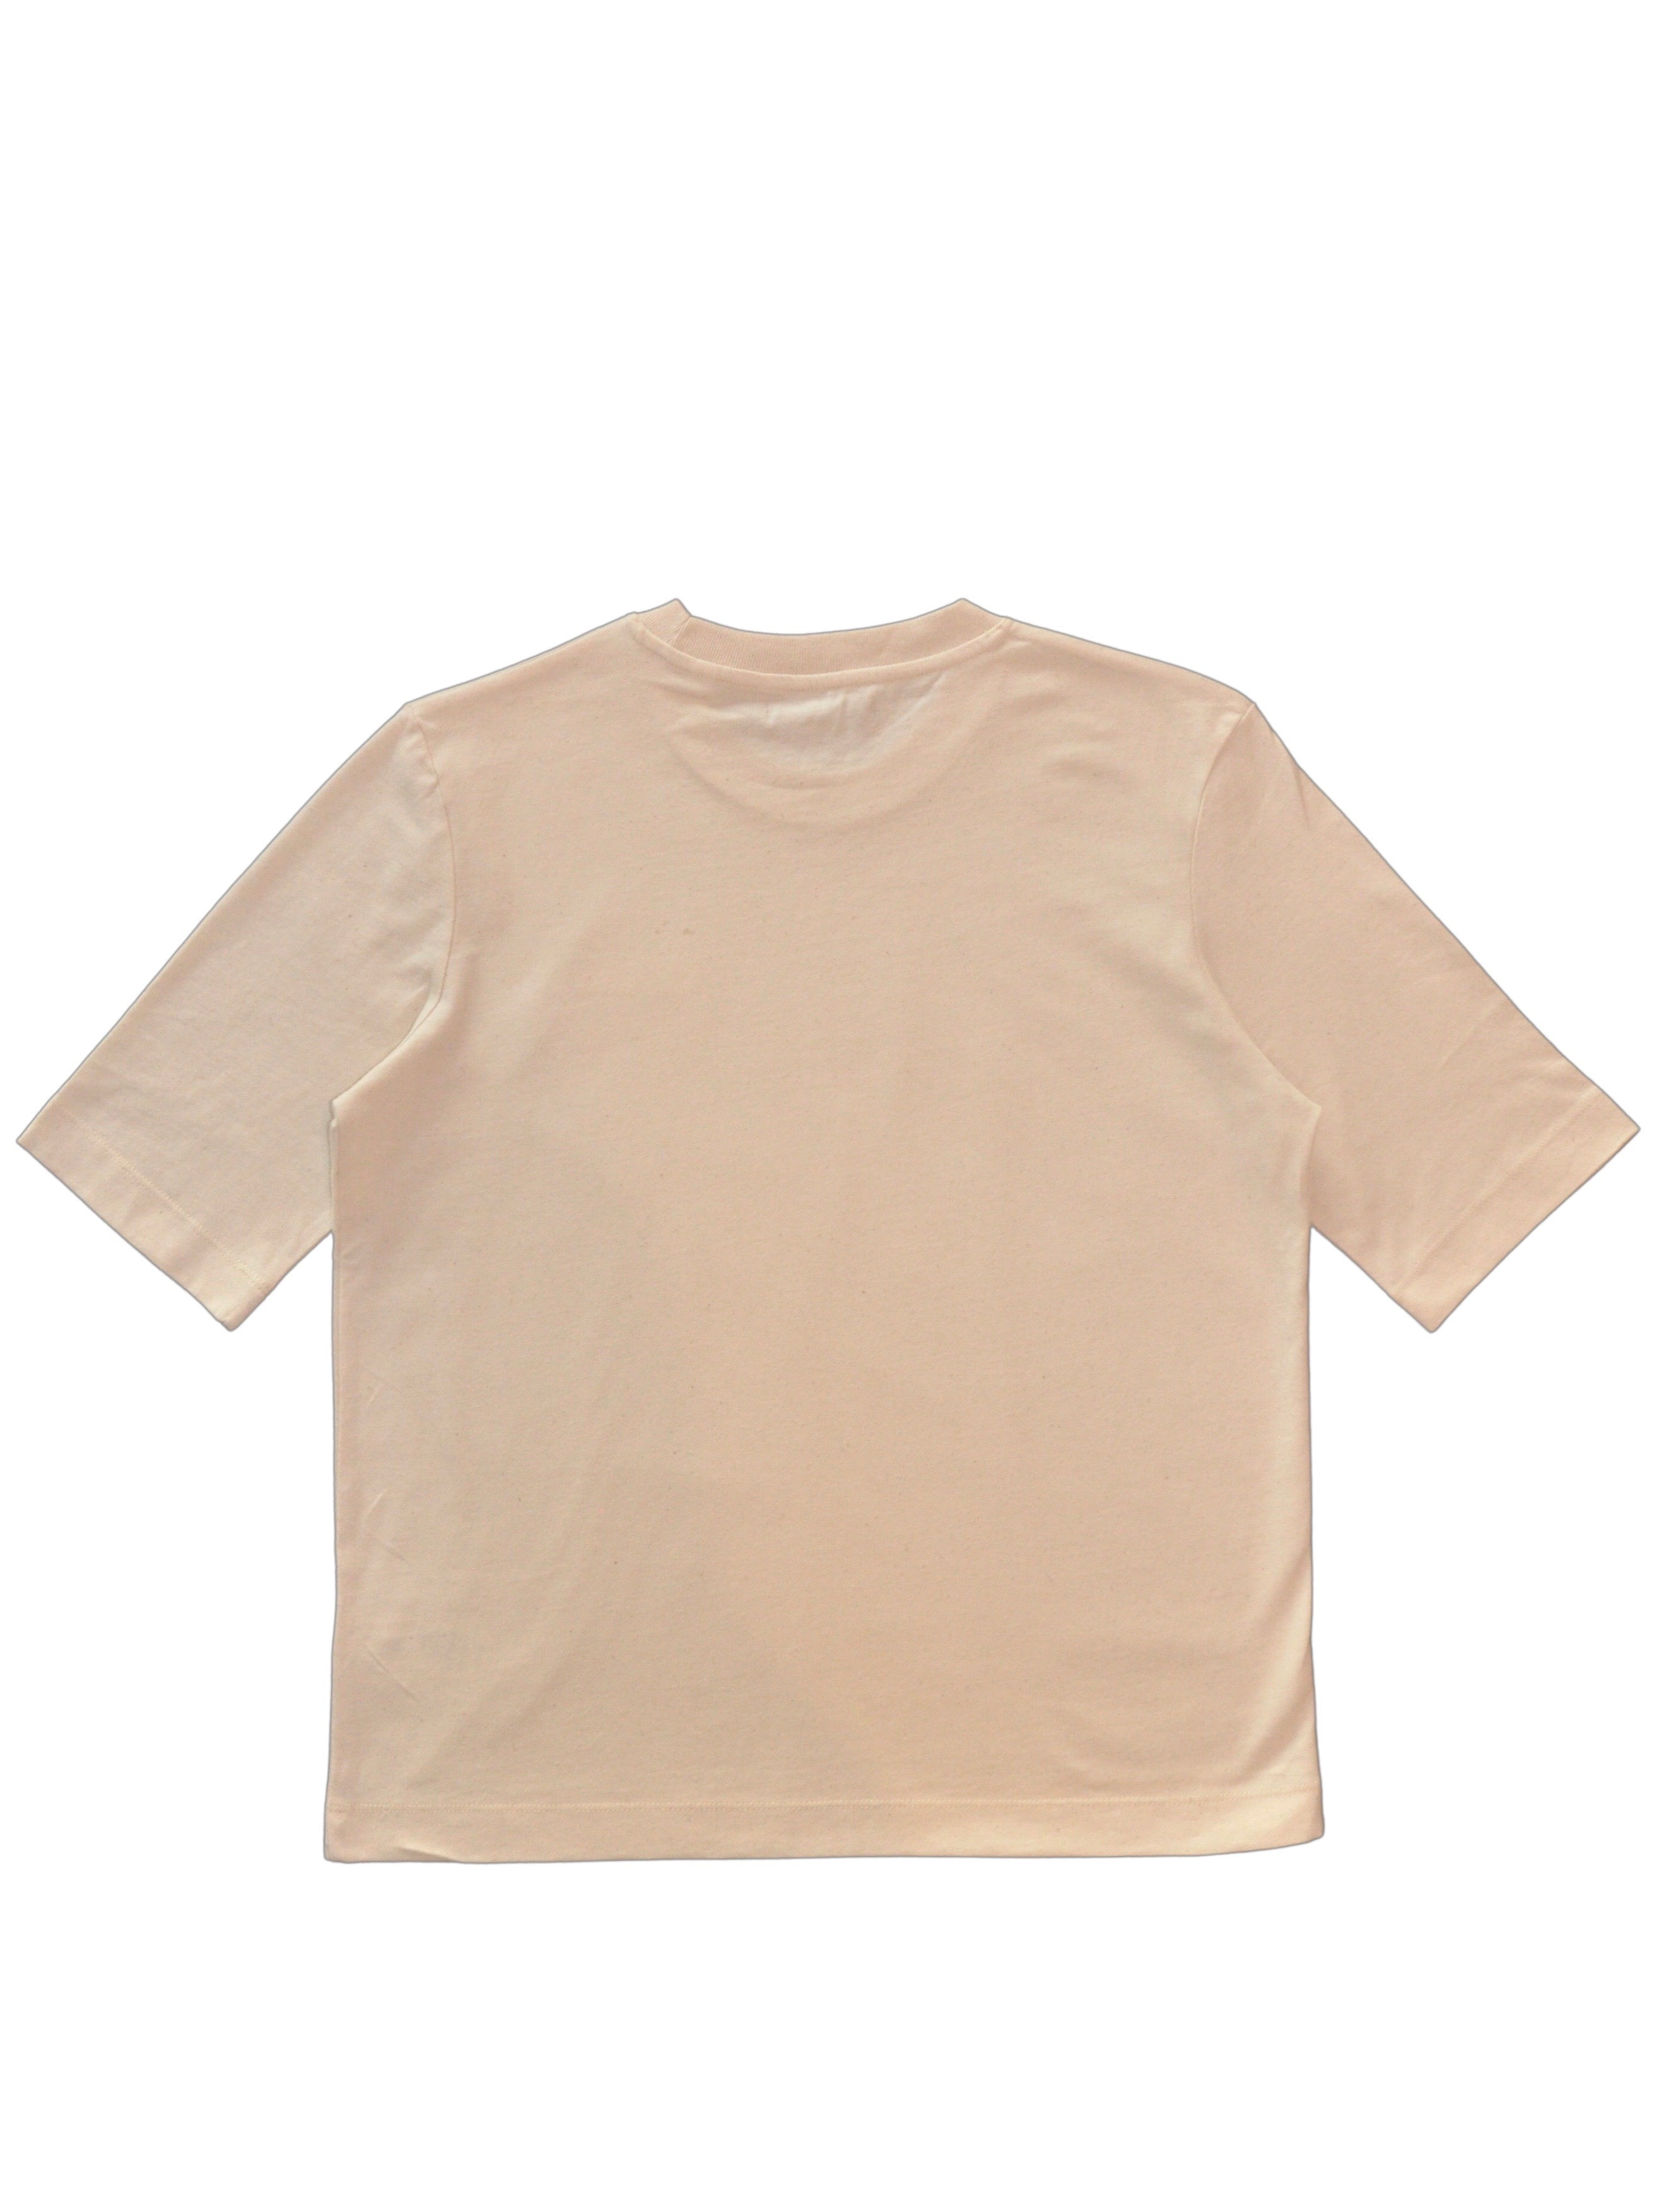 BY11 Organic Cotton Embroidered Easy Fit T-shirt - Natural